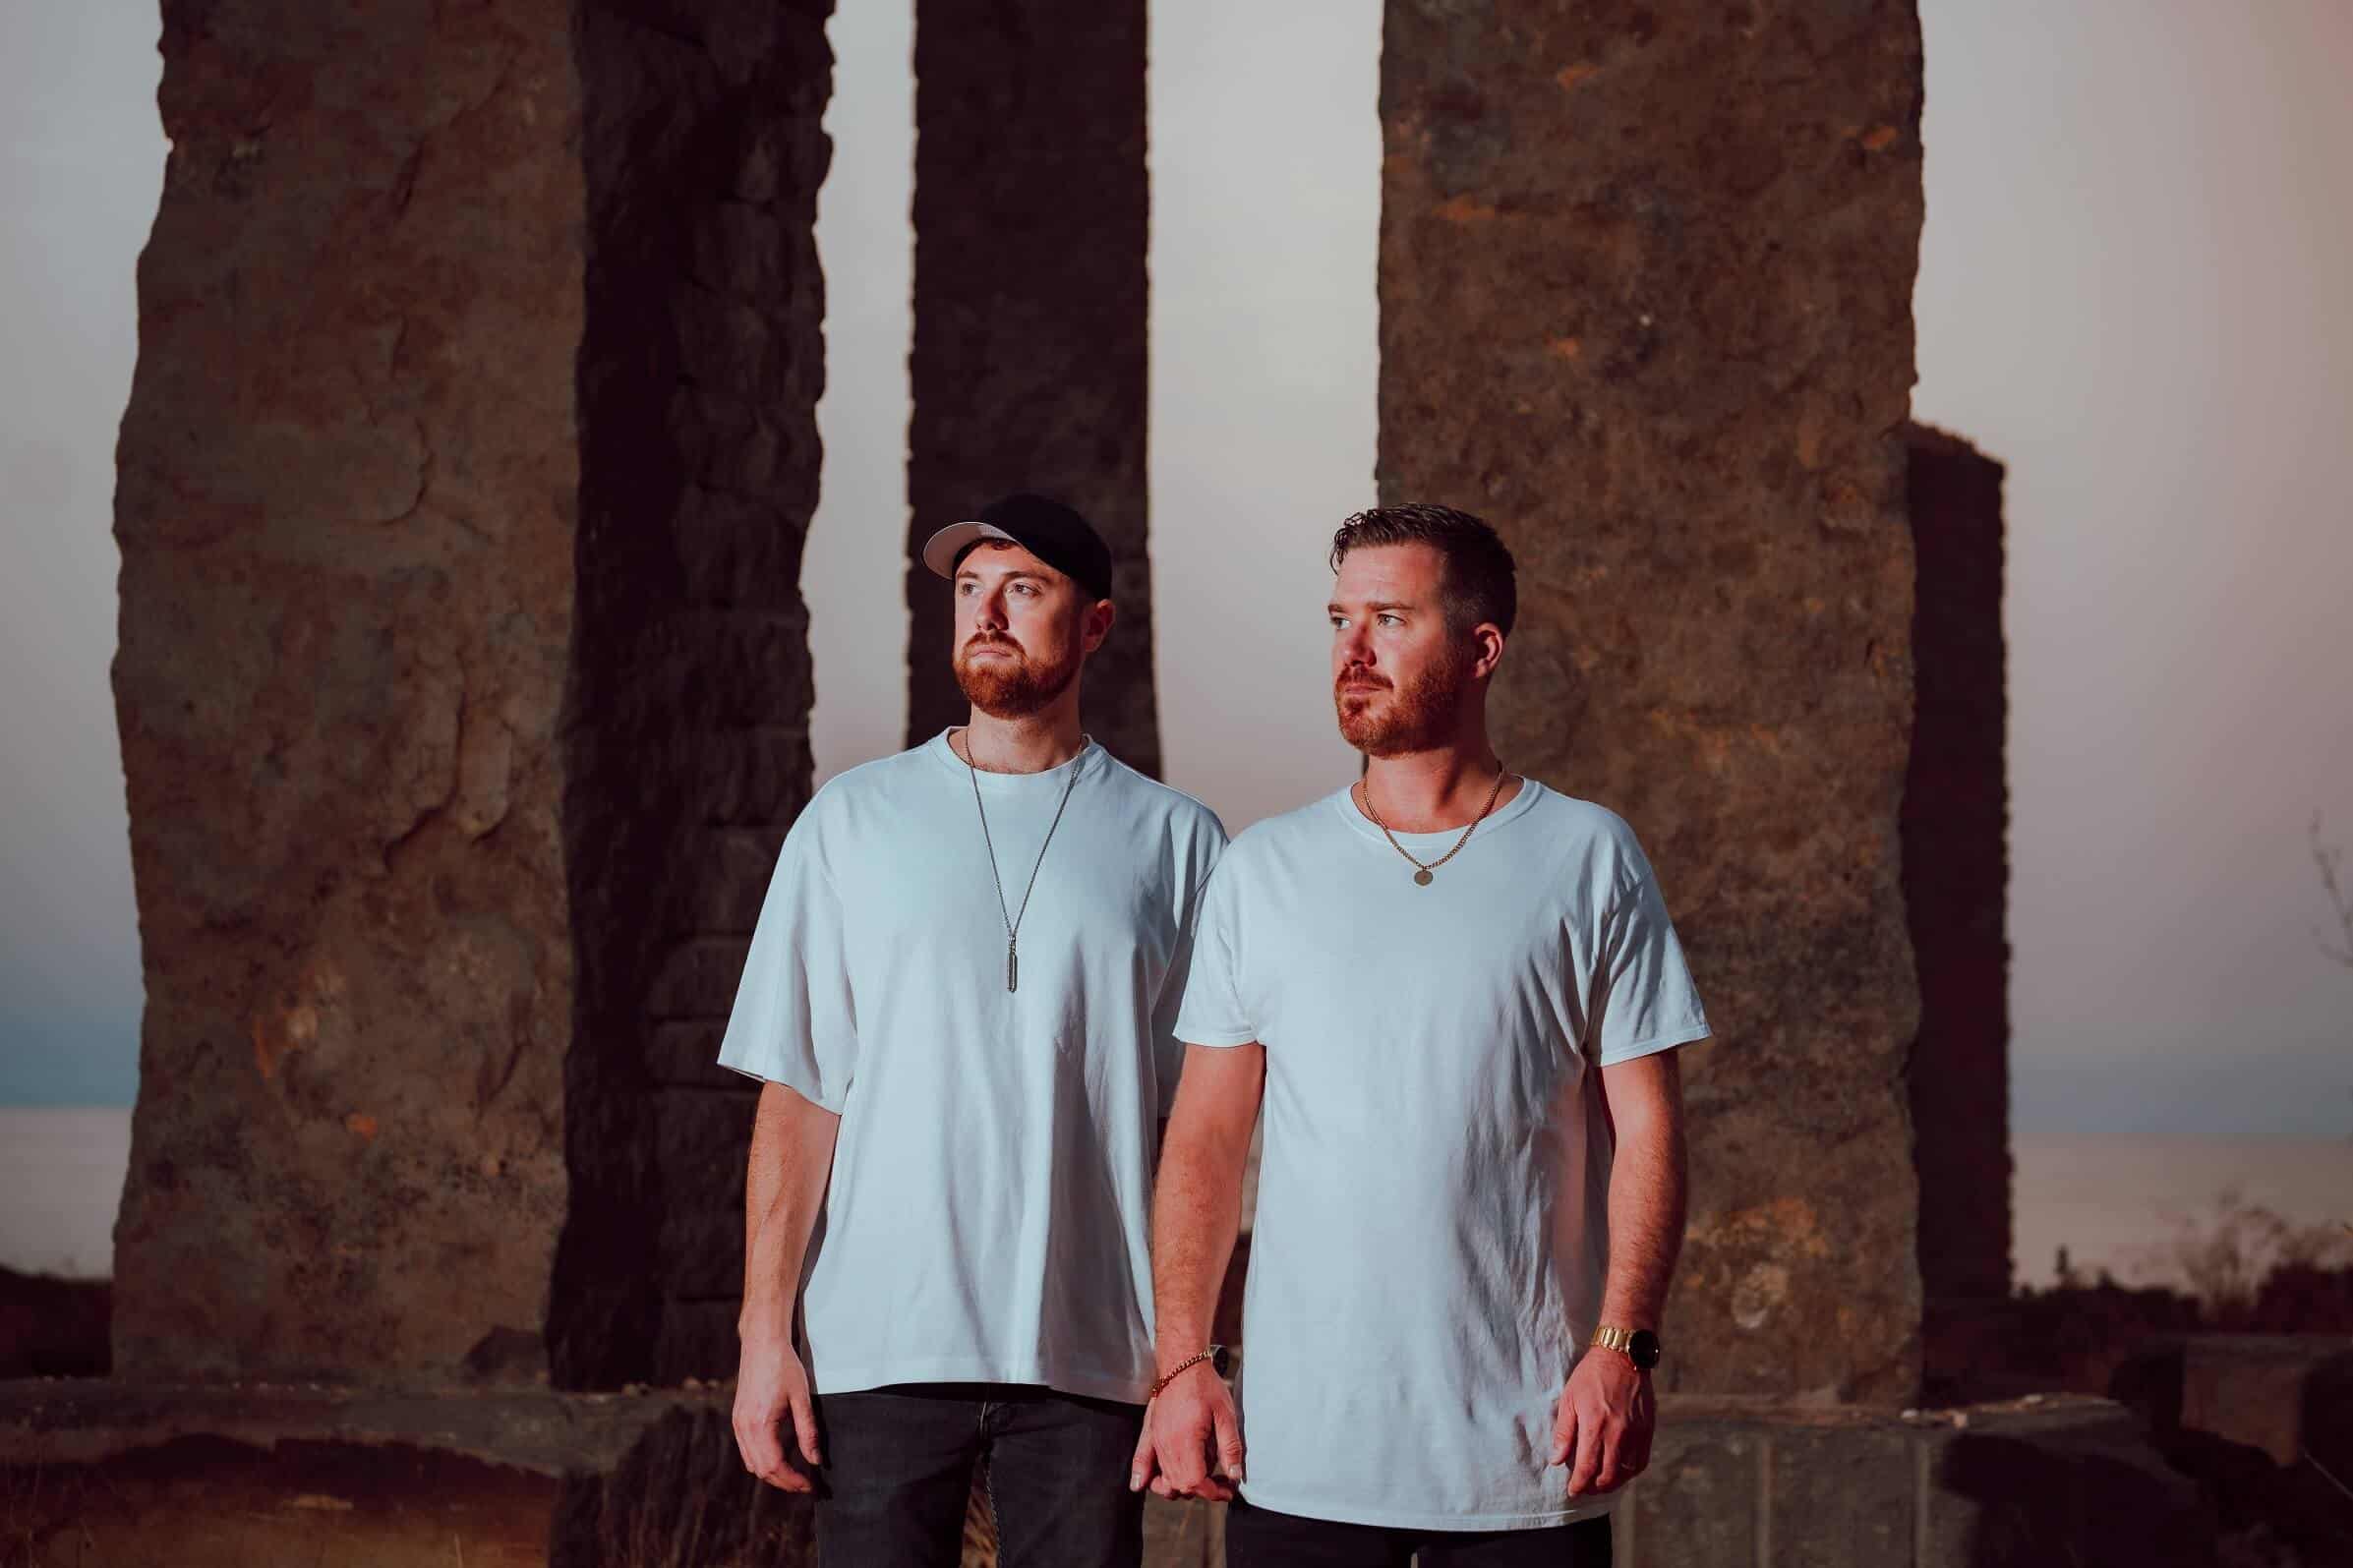 Gorgon City release their remix of John Summit’s hit single “Where You Are” feat. Hayla